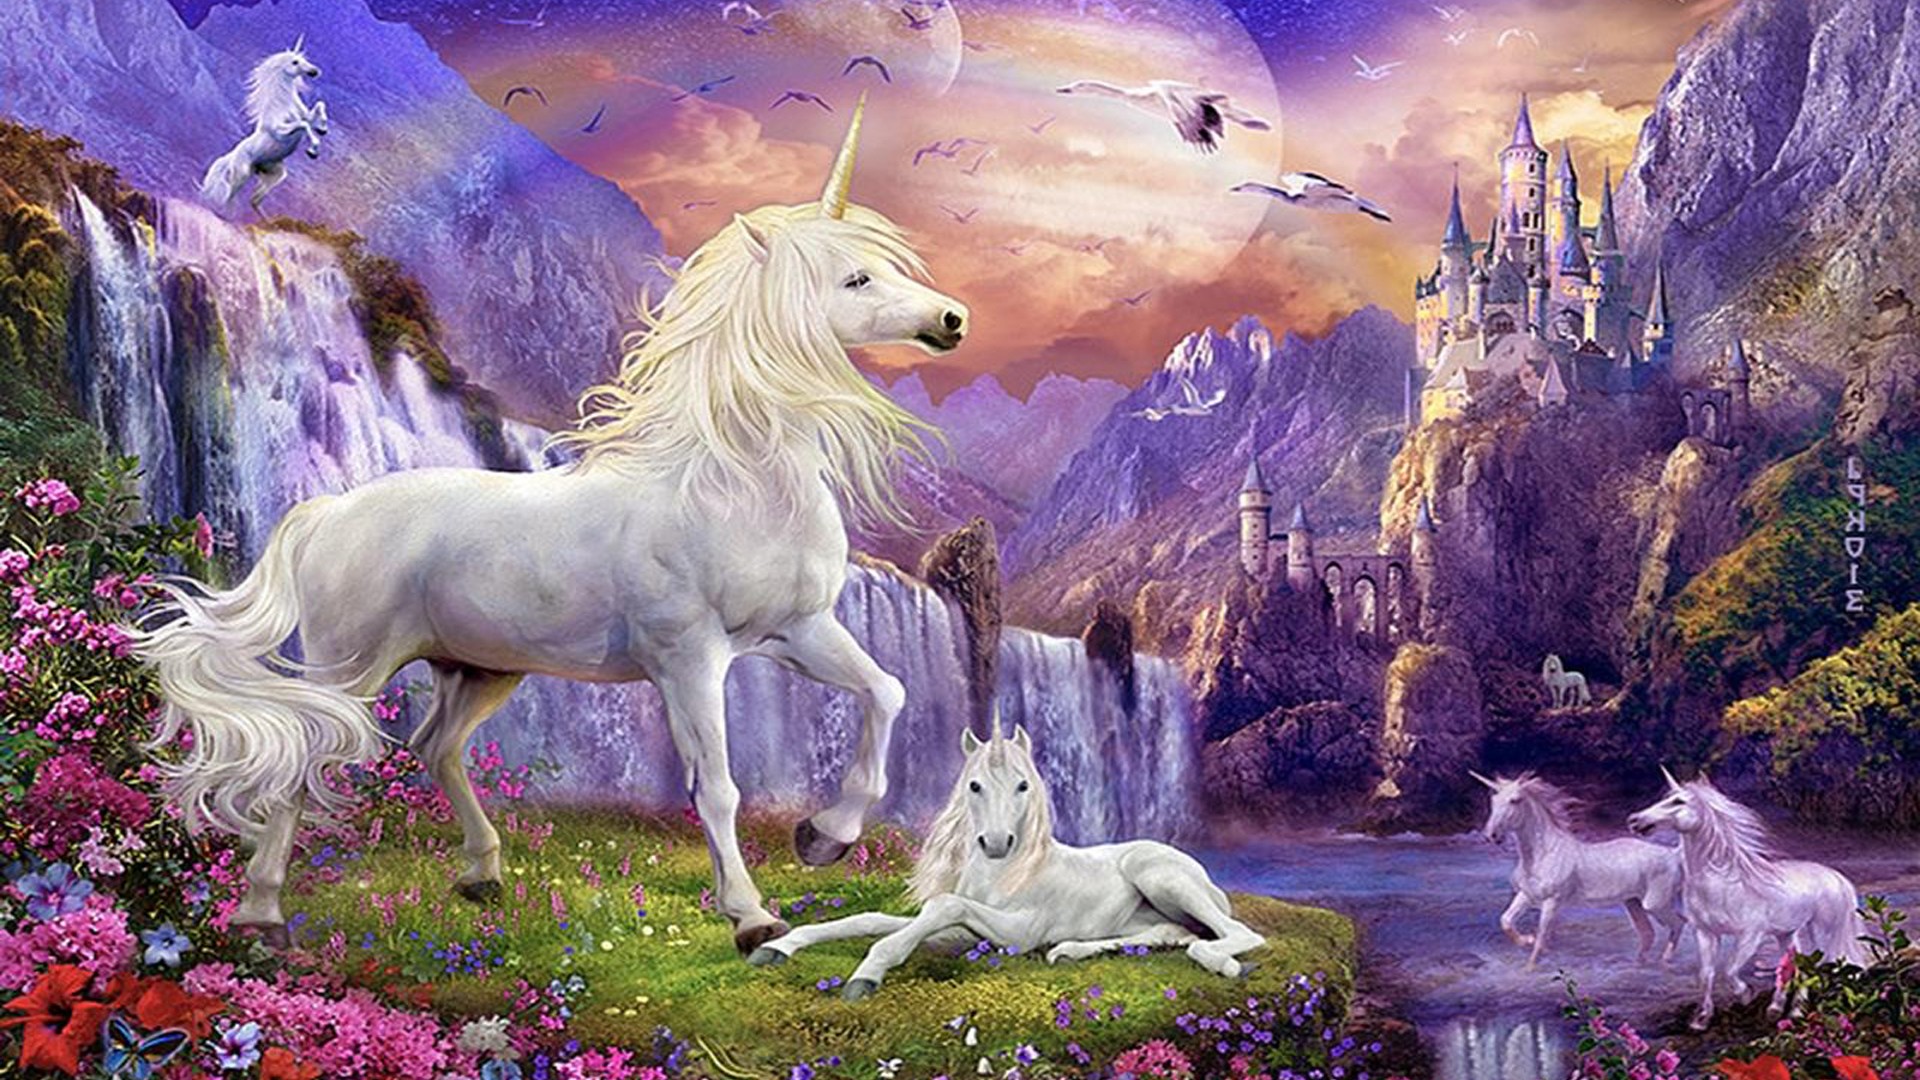 Unicorn In The Mountains - HD Wallpaper 